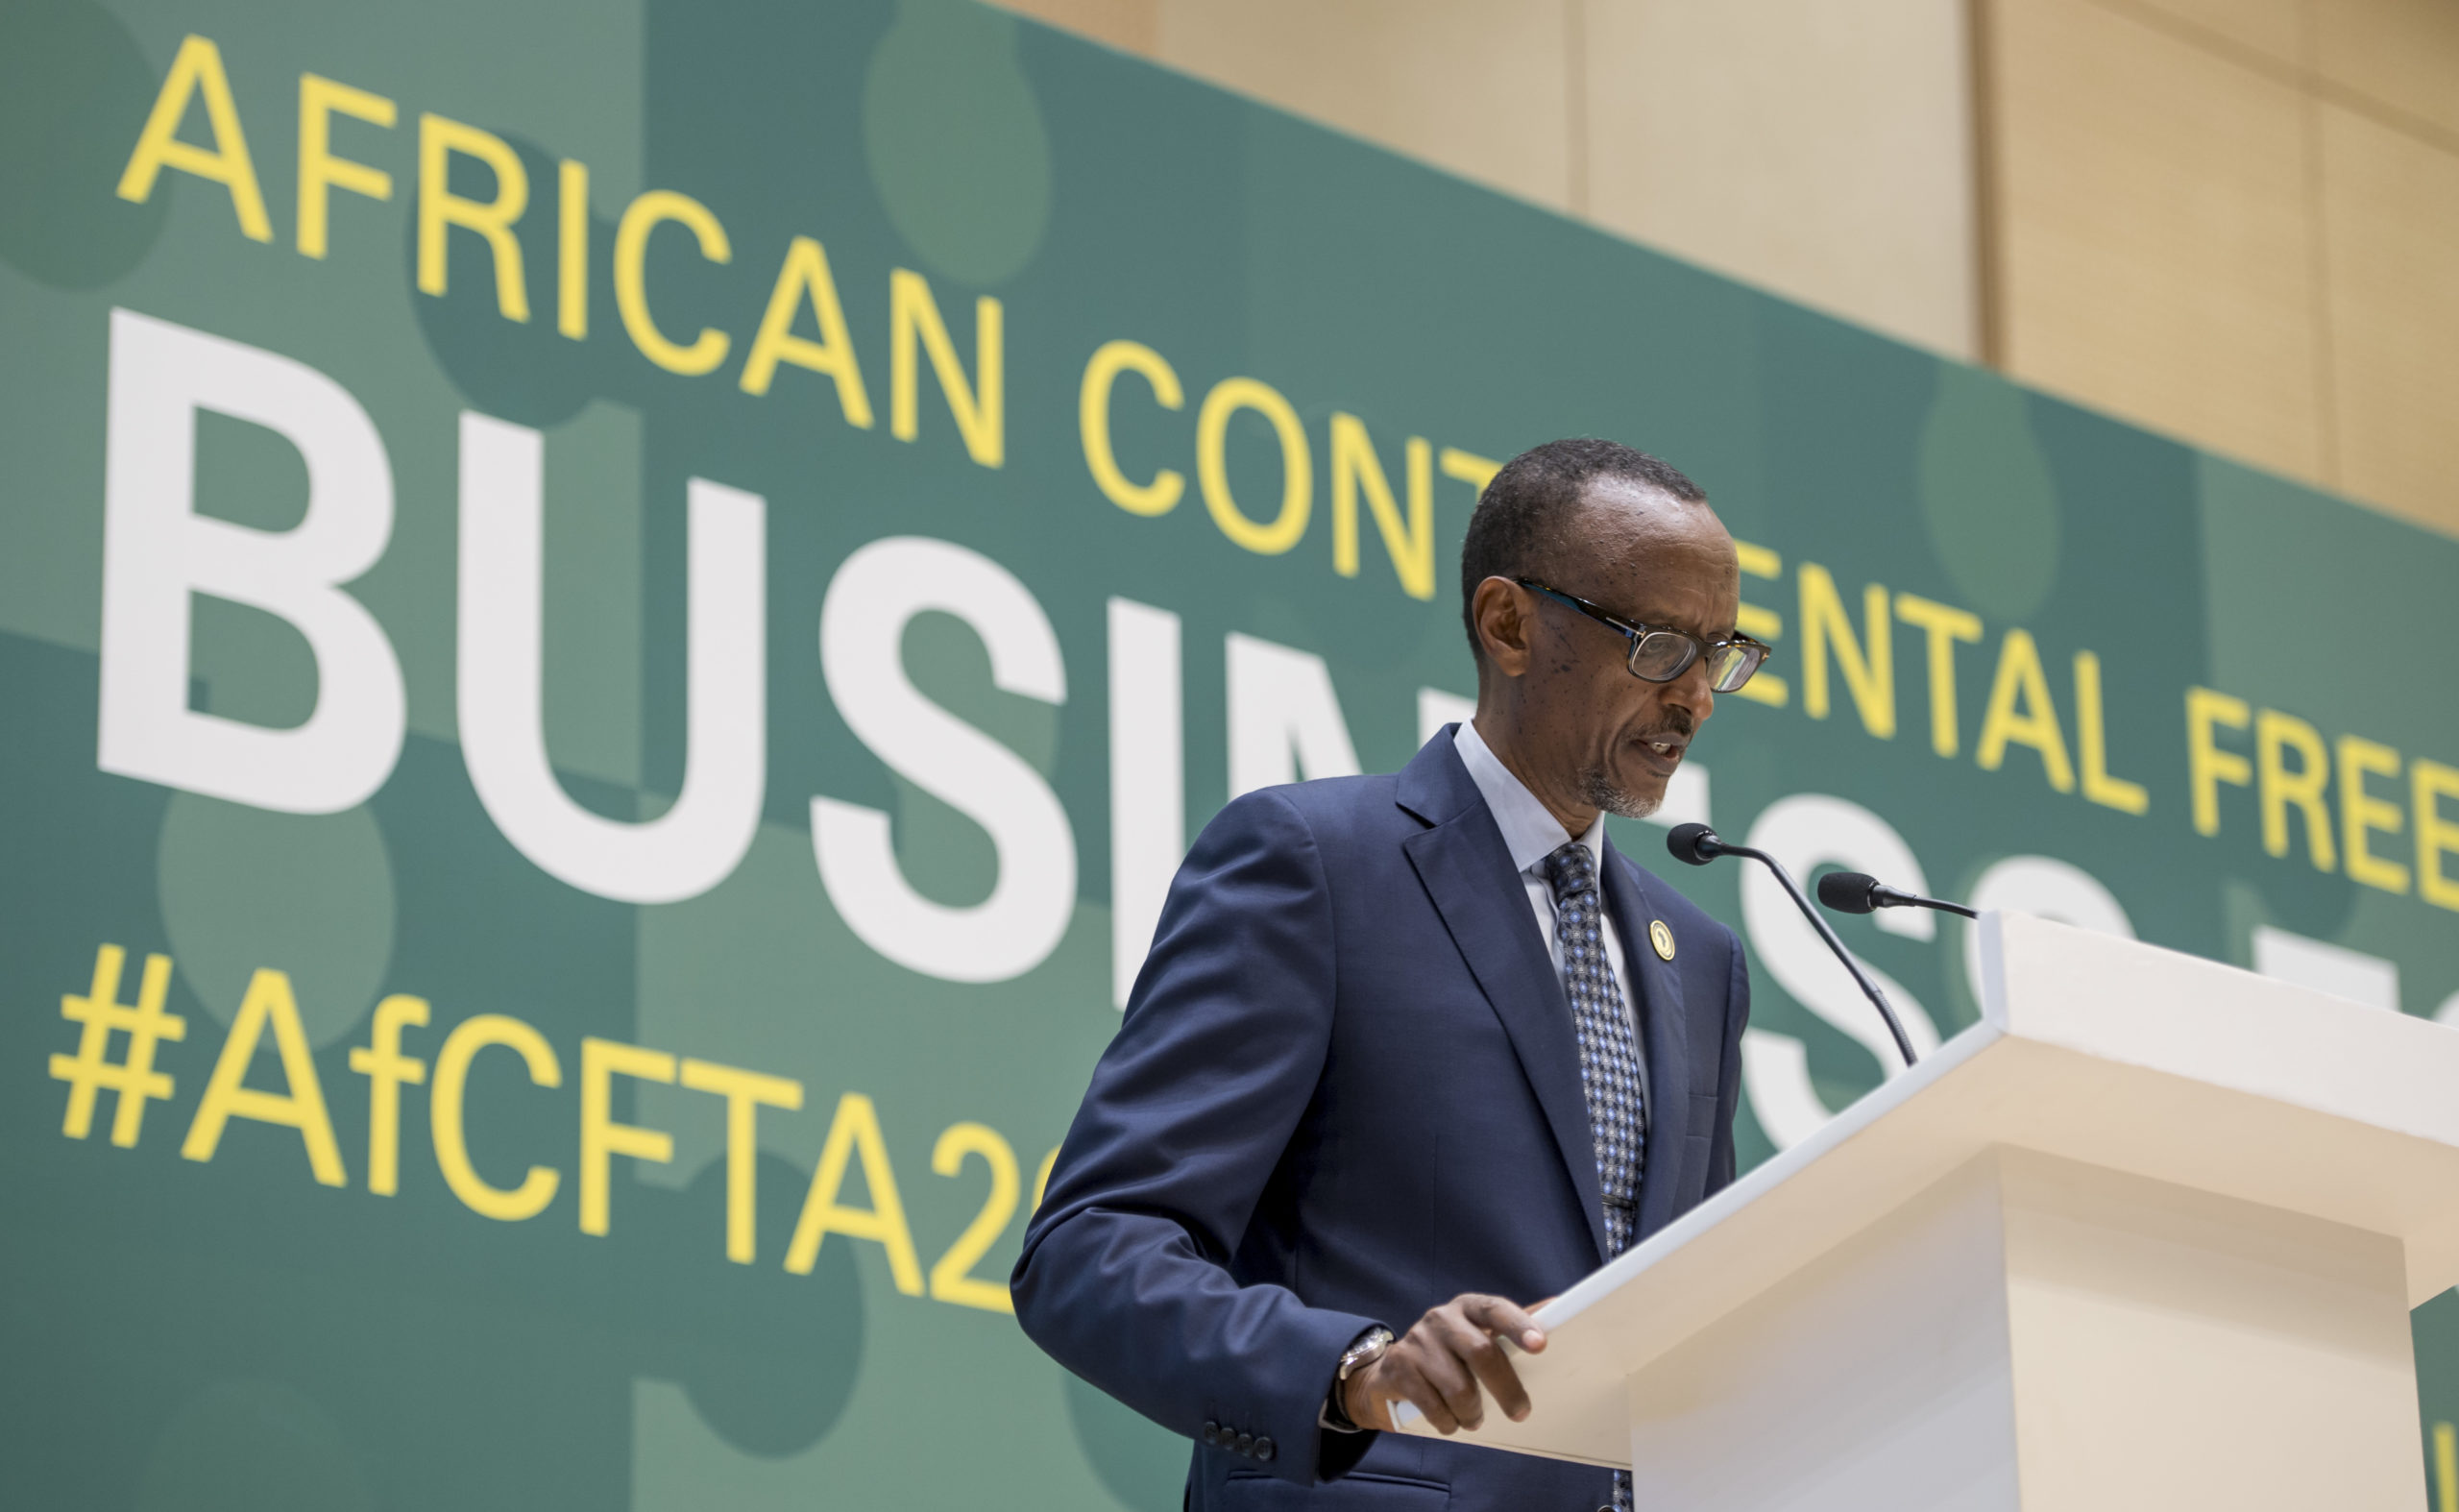 African Continental Free Trade Agreement Increases Economic Growth